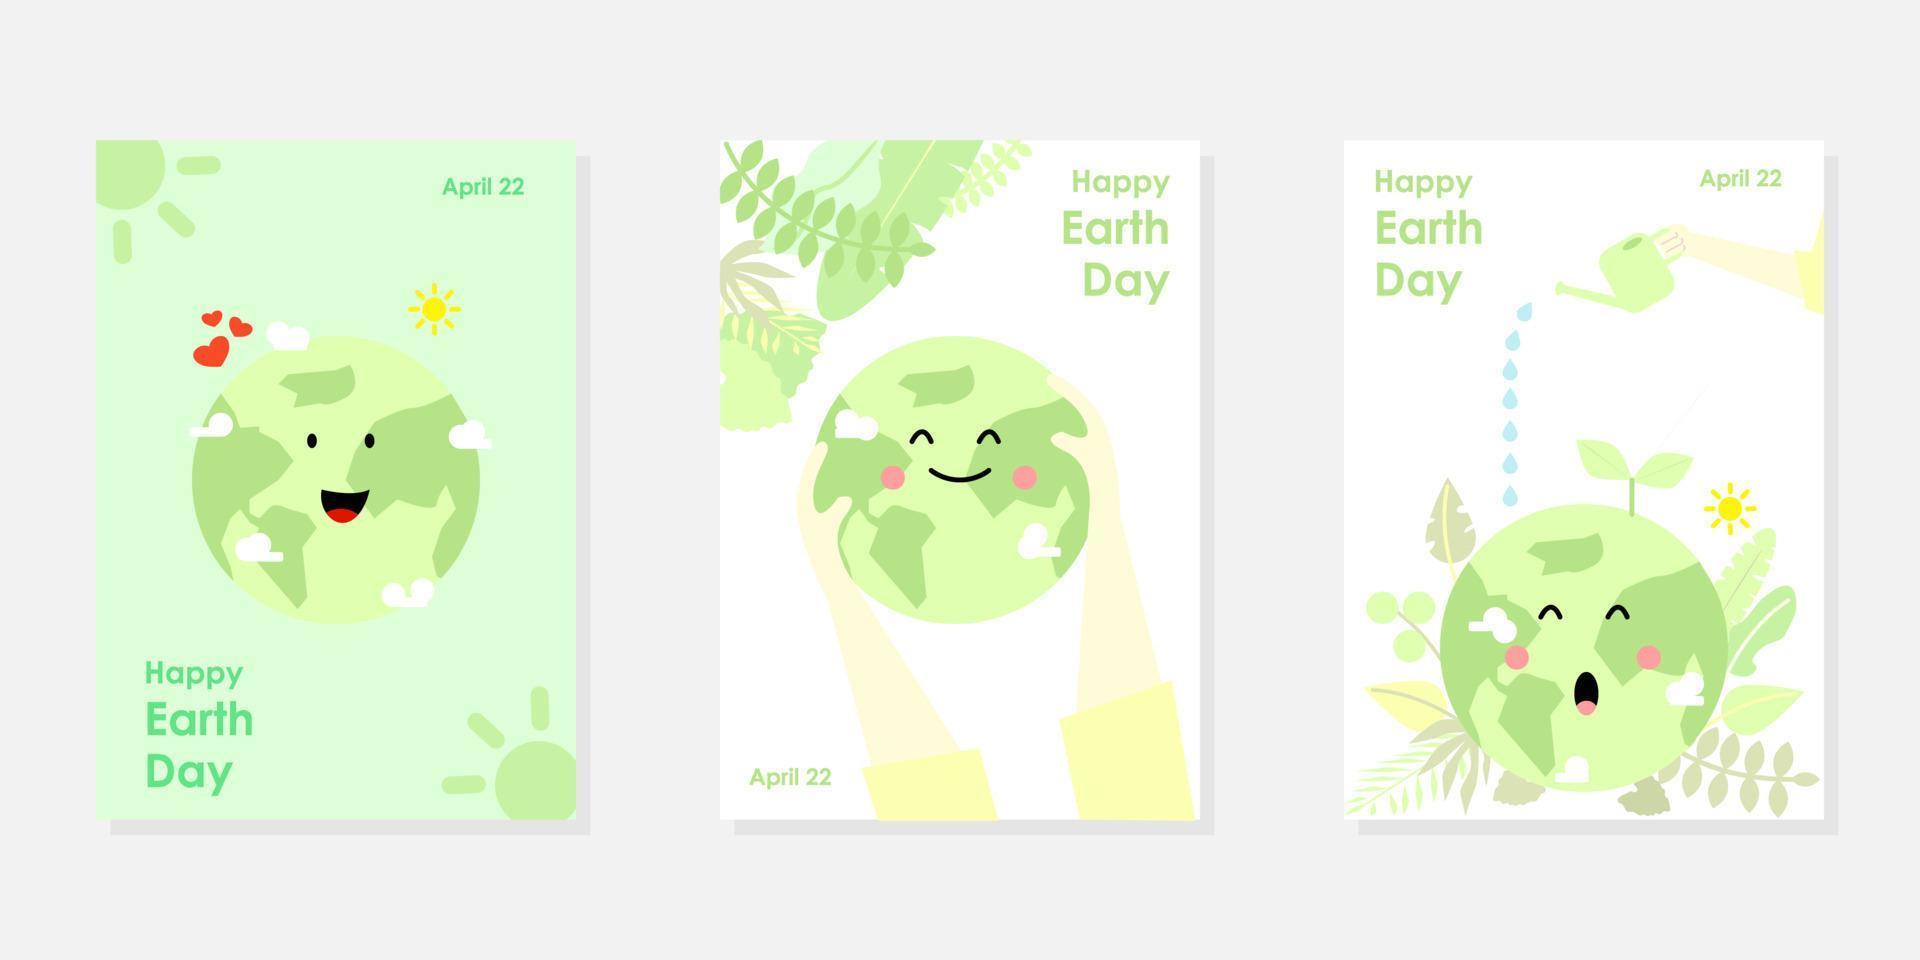 Earth day illustration set. Vector concept for graphic and web design, business presentations, marketing and print materials with attractive and eye-catching colors